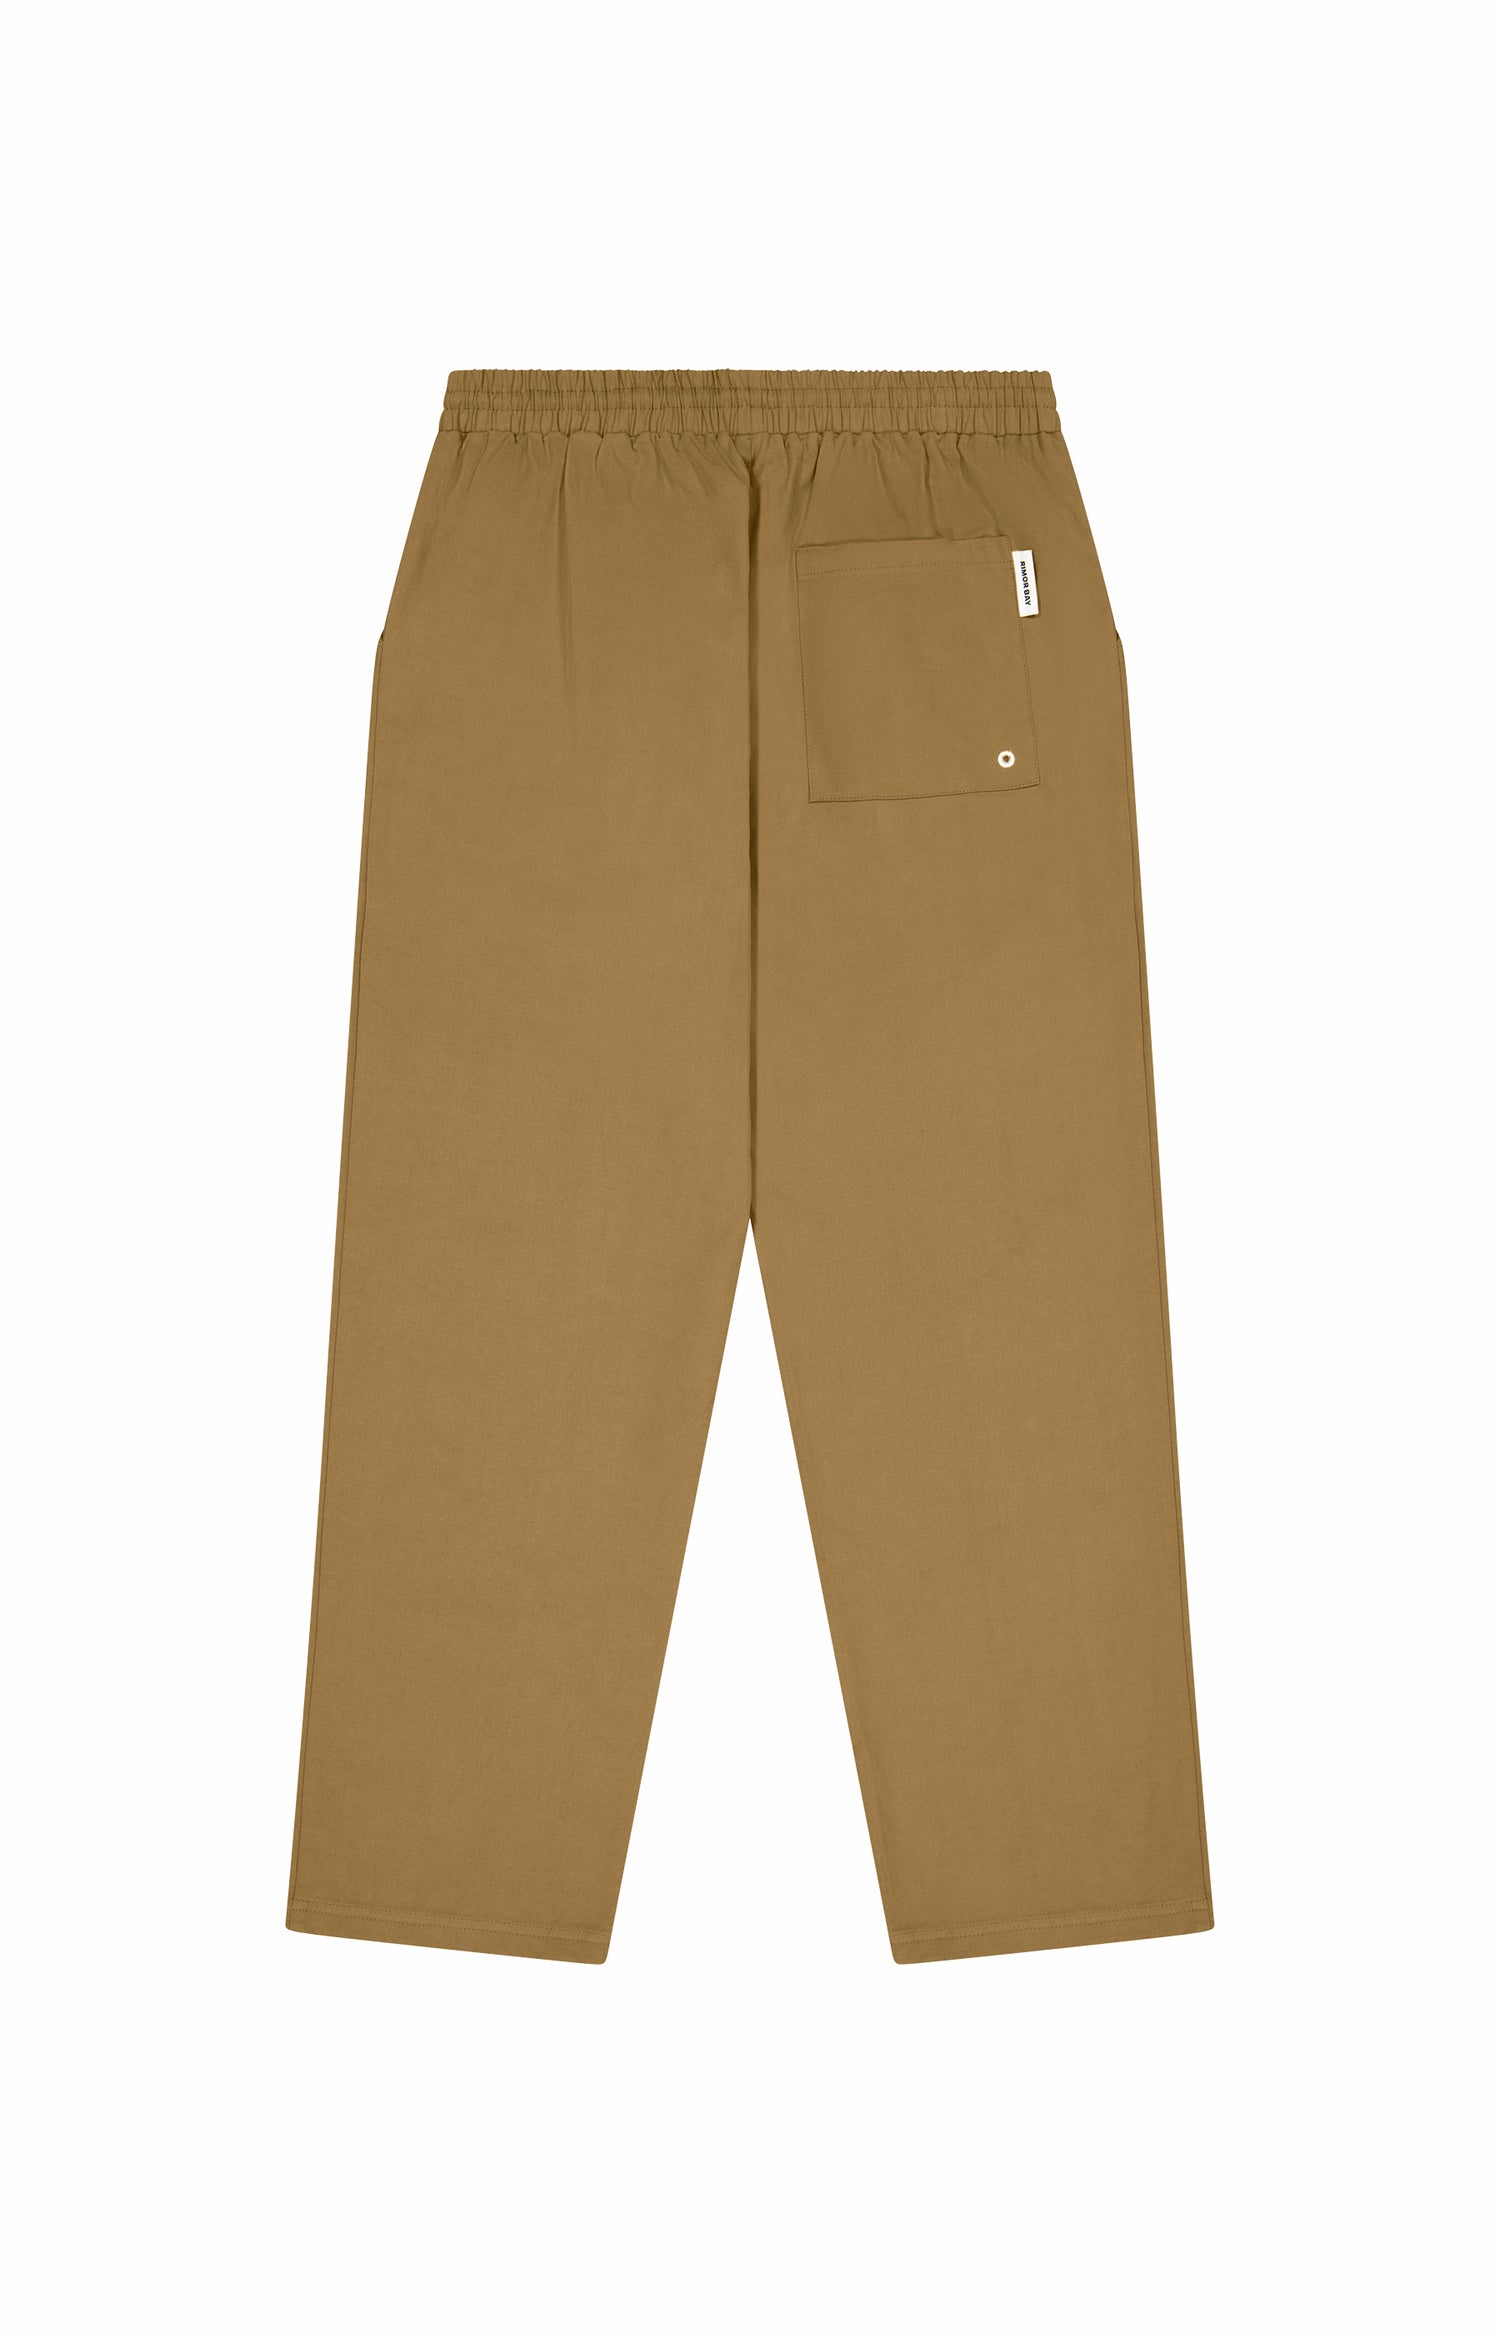 back of beige pants with one pocket and elastic waistband